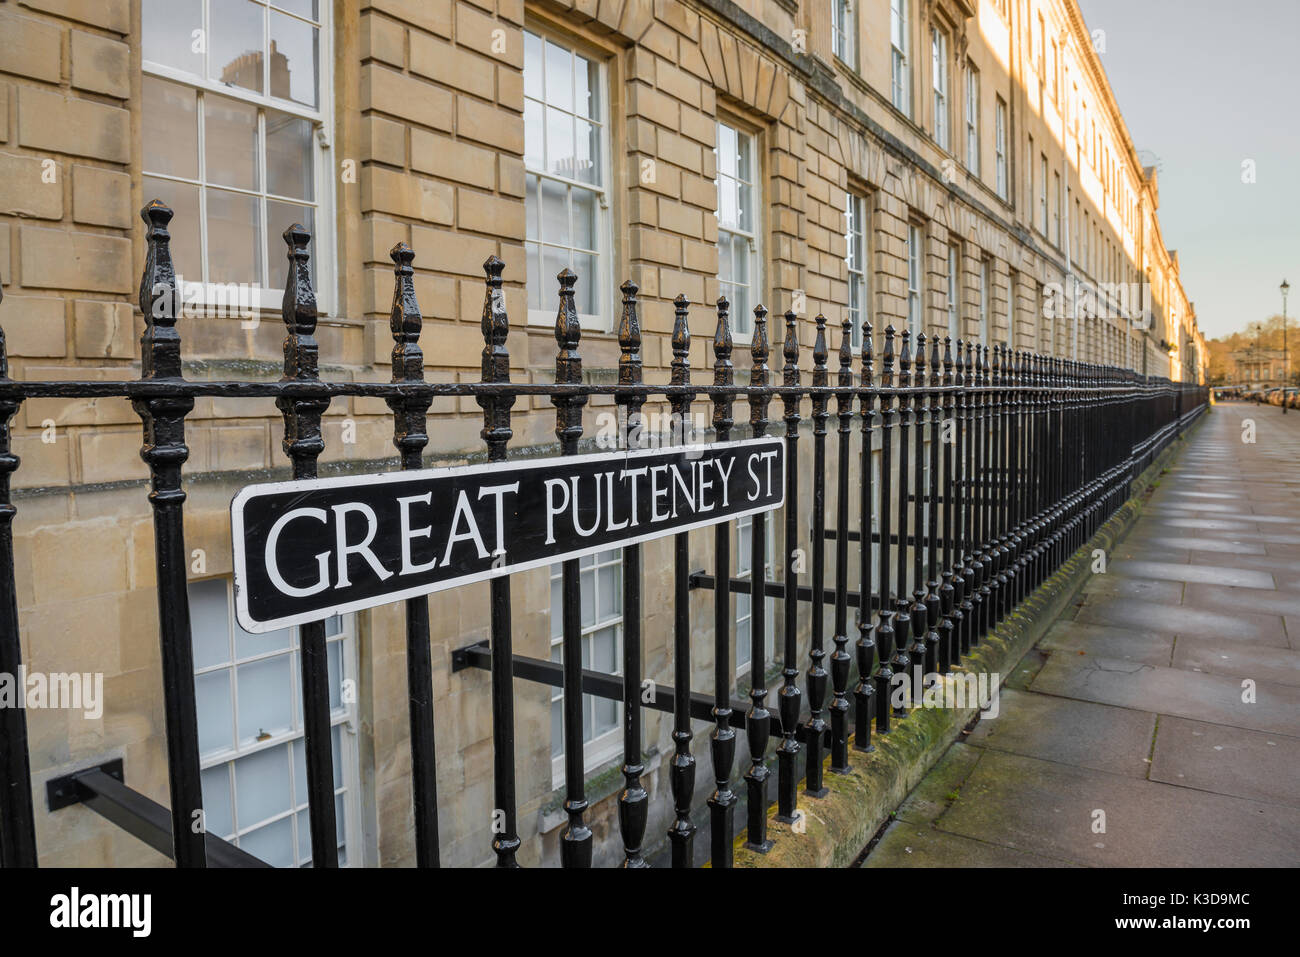 Great Pulteney Street, view of a well-preserved row of Georgian terraced houses in the centre of the city of Bath, UK. Stock Photo